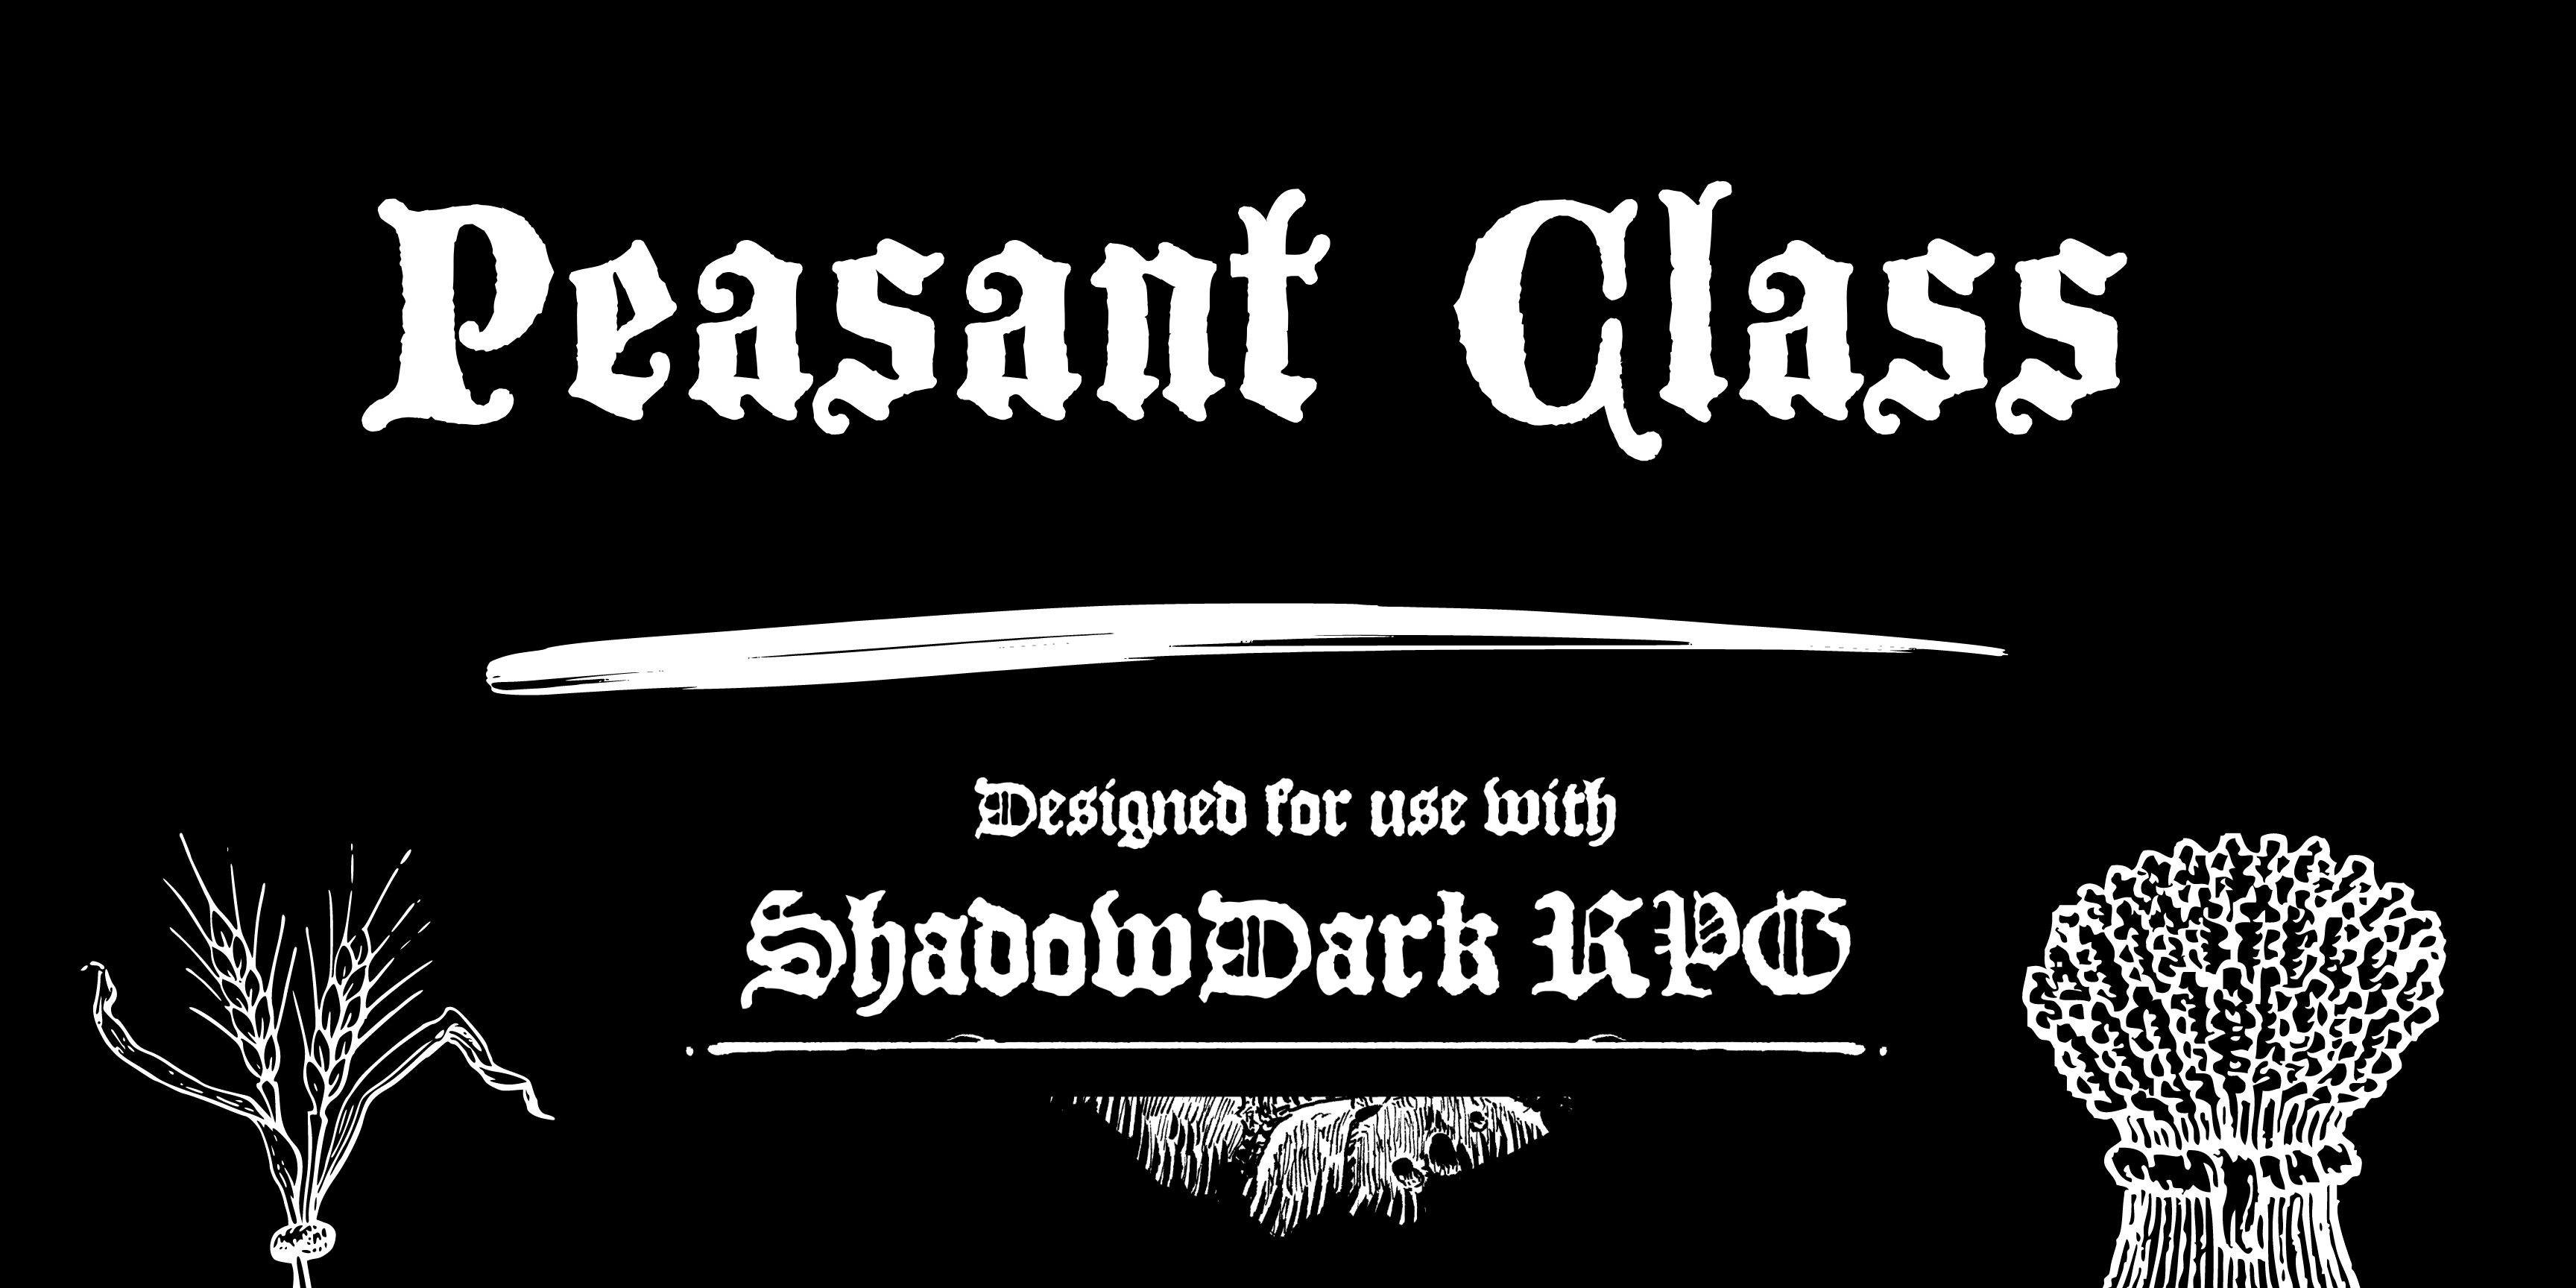 Peasant Class - Designed for use with Shadowdark RPG